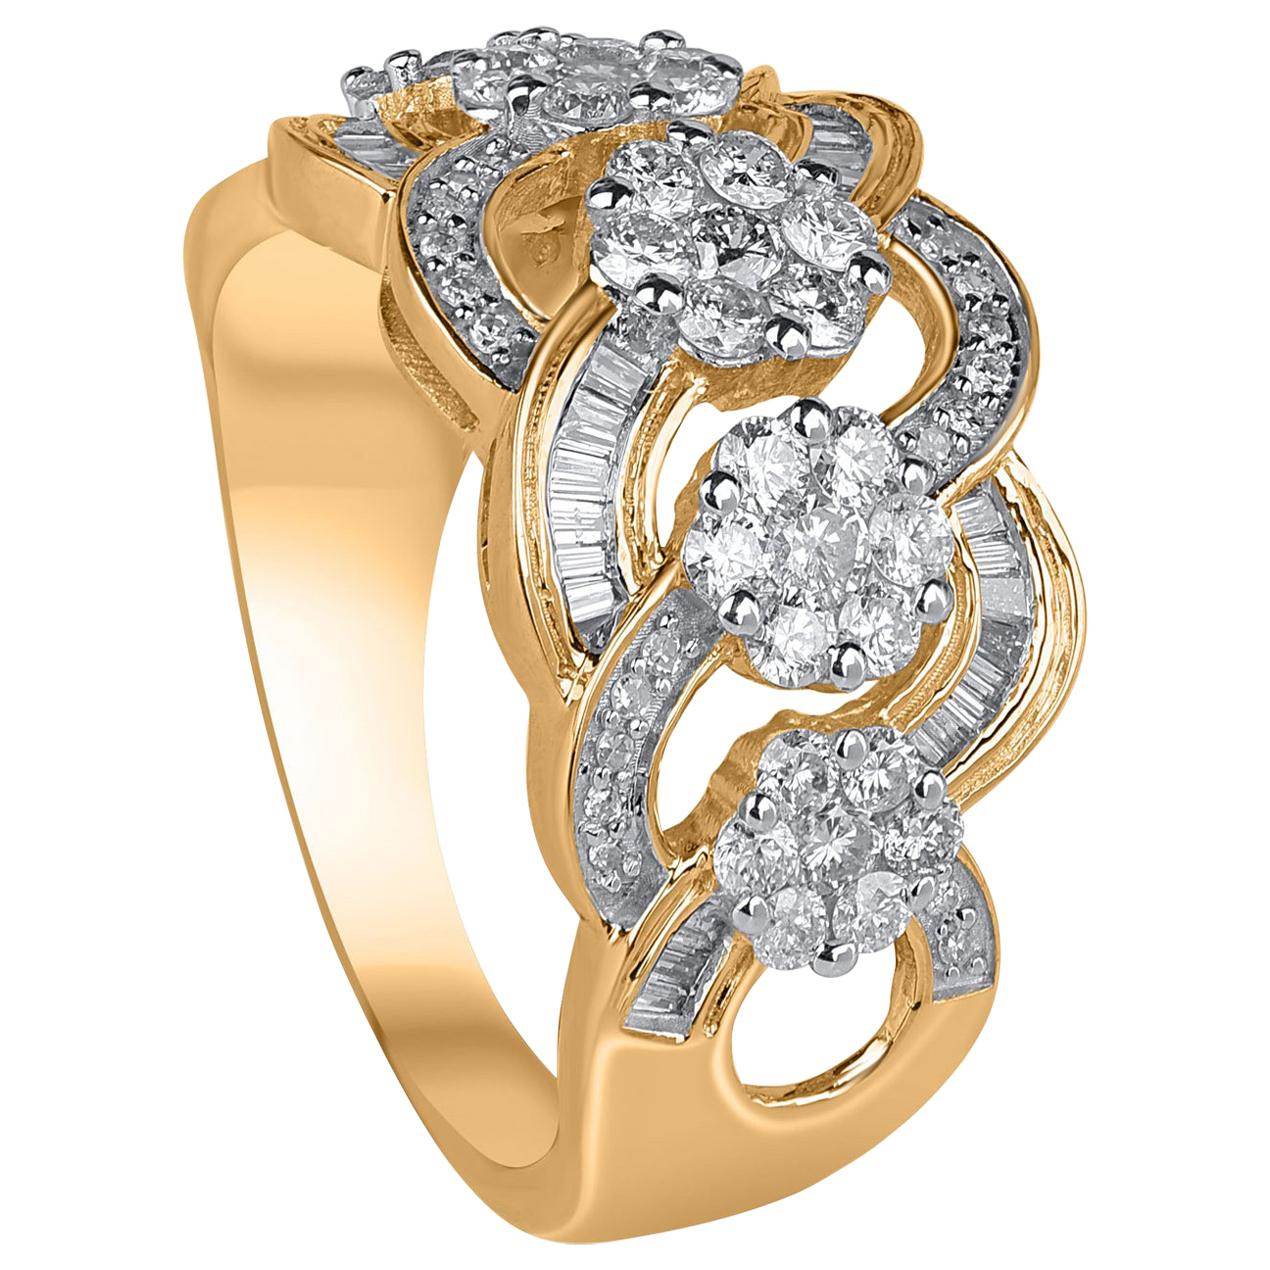 Absolutely eye catching with an exquisite design, this diamond ring is studded with 61 brilliant and 32 baguette diamonds in channel and pressure setting. Crafted in 10 kt yellow gold, diamonds are graded HI color, I2 clarity.    

Metal color and